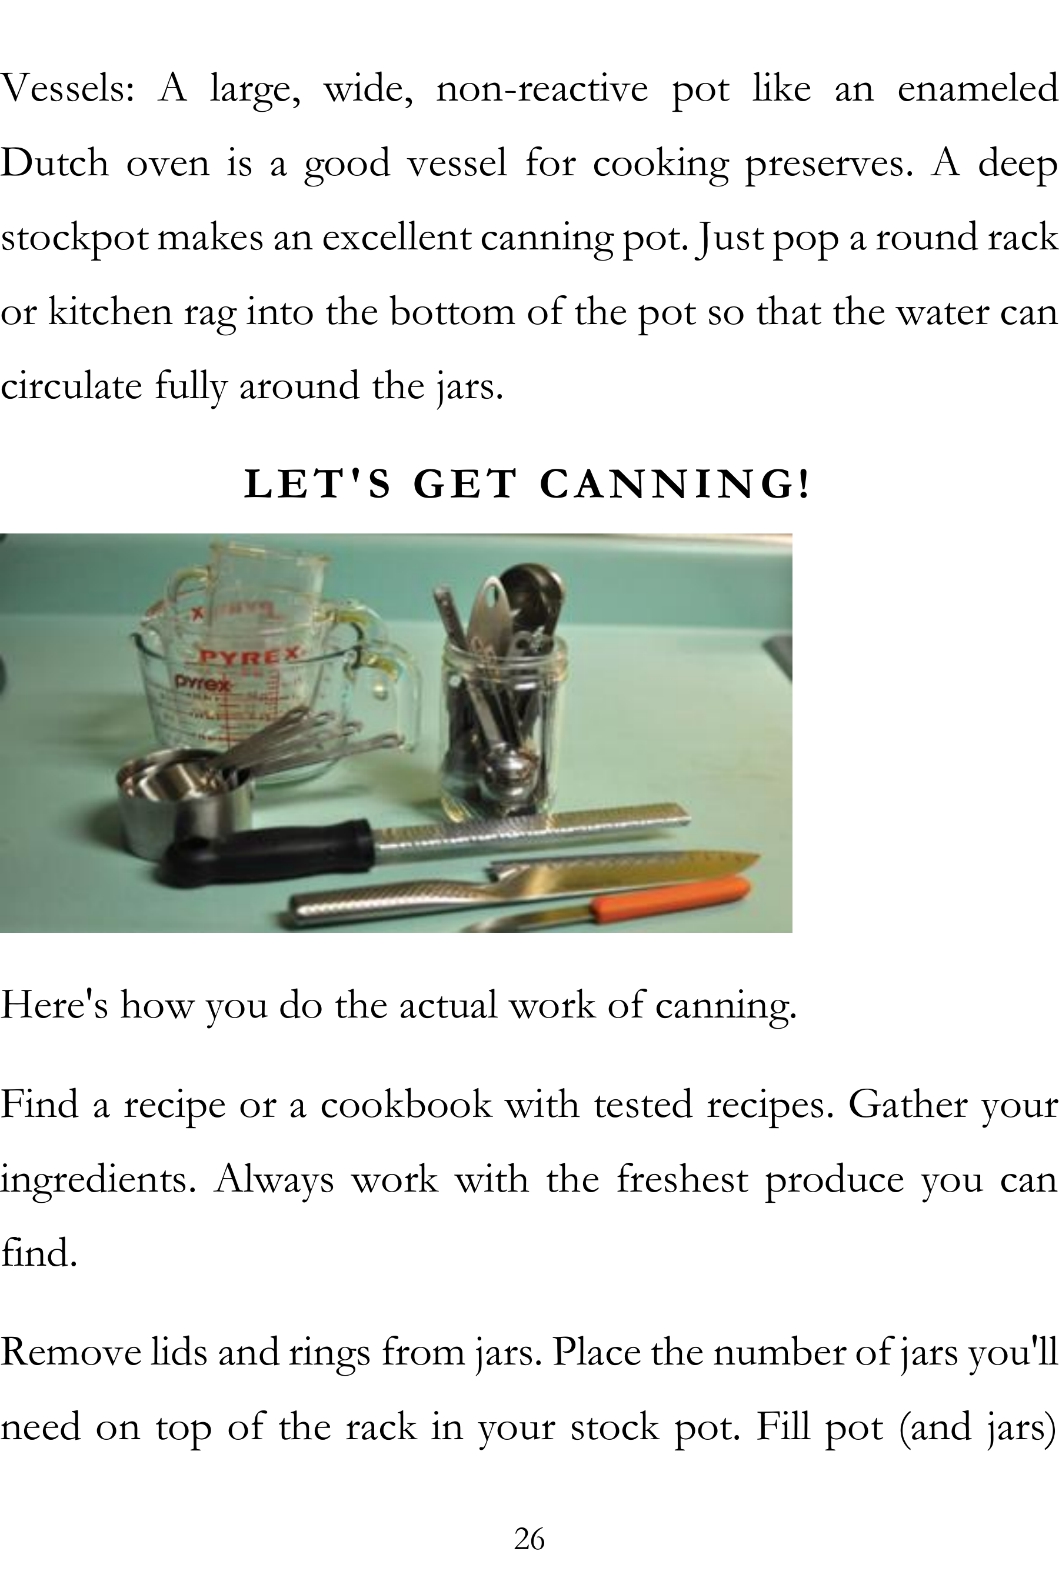 Canning Guide for Beginners Canning Tips and Recipes Canning at Home - photo 28